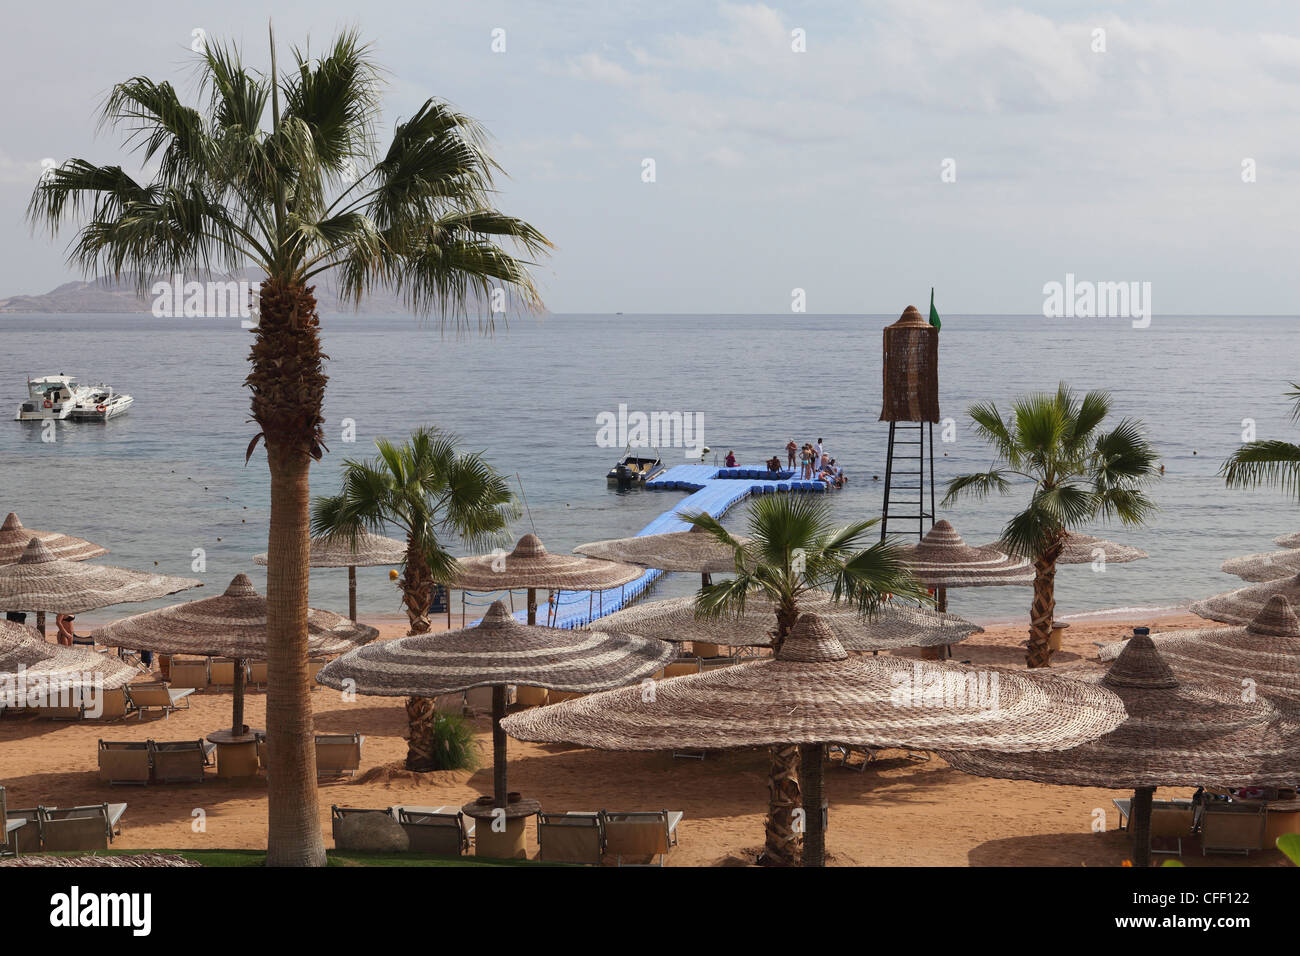 Sunshades and palm trees by the beach at White Knight Beach, Sharm el-Sheikh, Egypt, North Africa, Africa Stock Photo